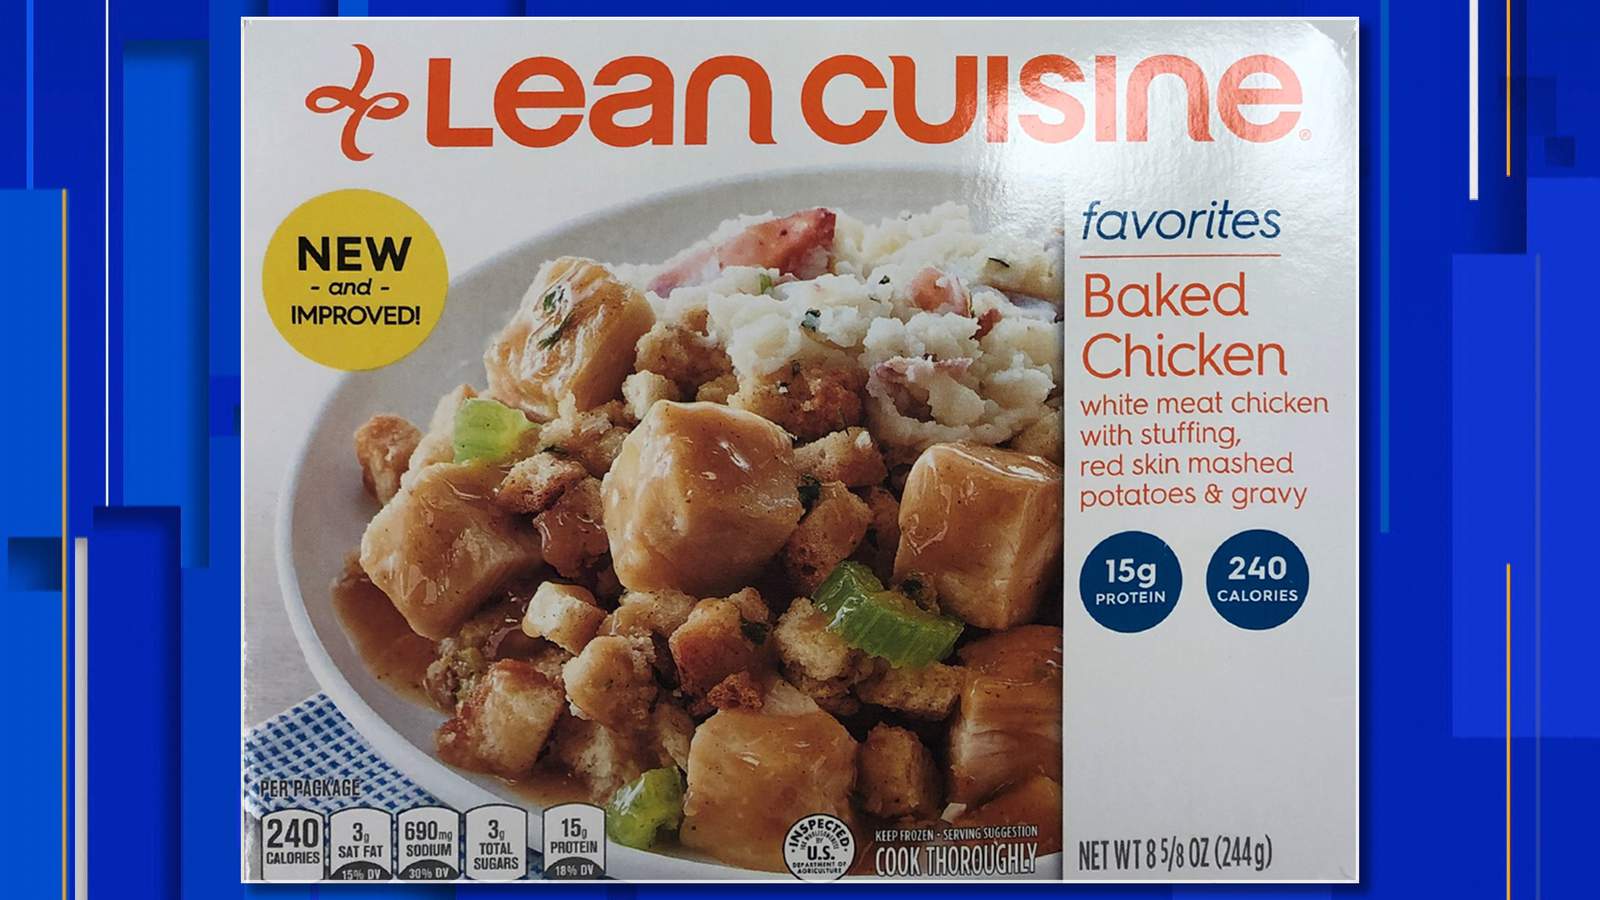 Lean Cuisine Baked Chicken Meal products recalled after plastic found in meal